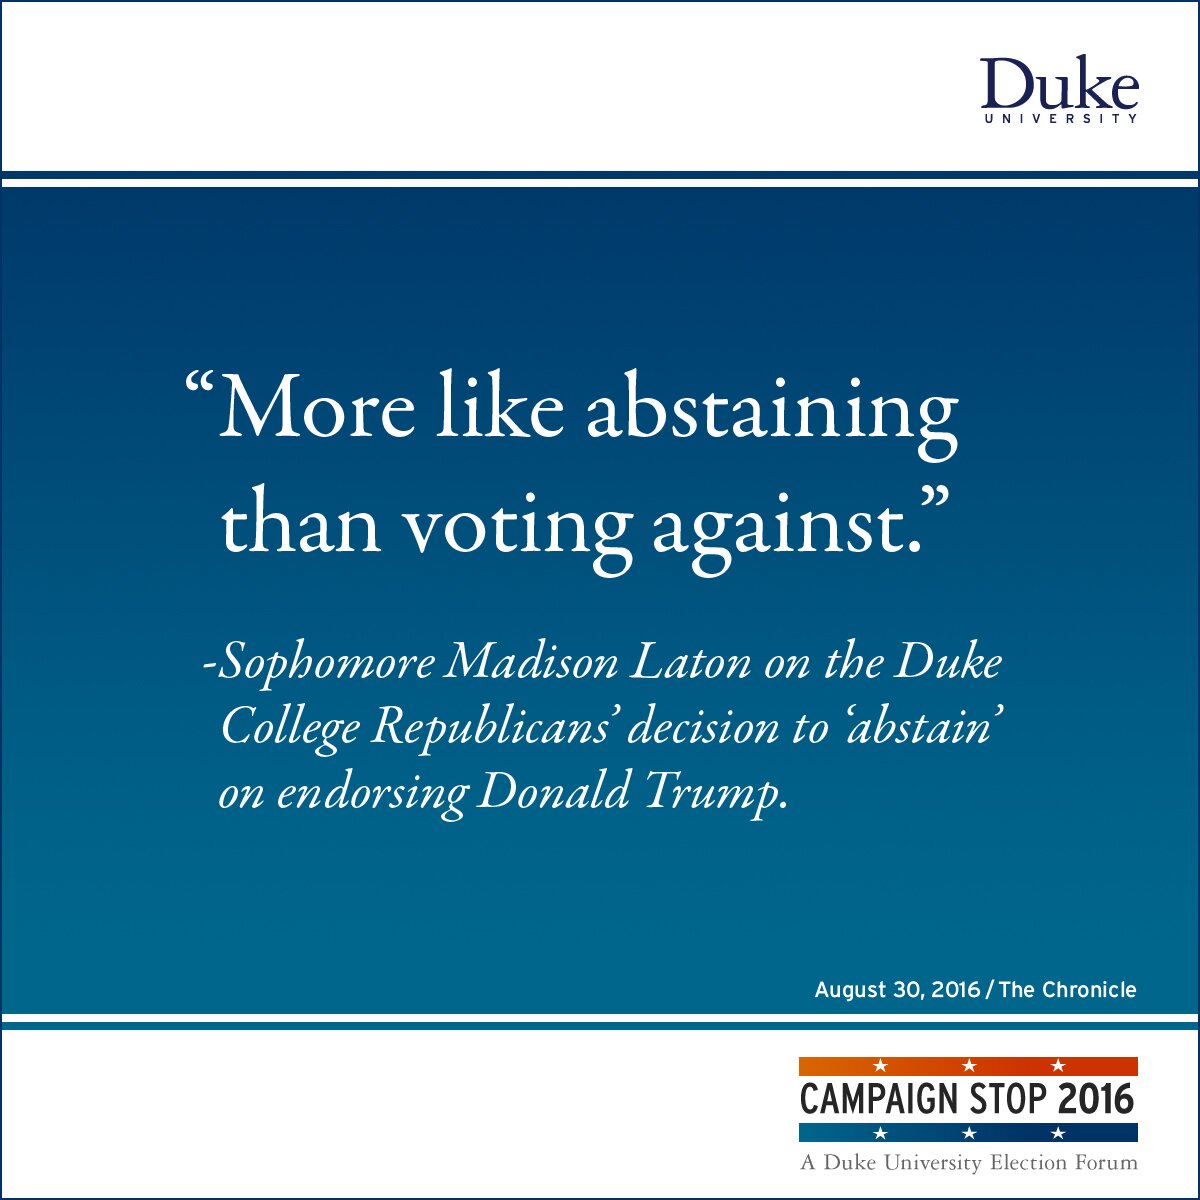 “More like abstaining than voting against.” -Sophomore Madison Laton on the Duke College Republicans’ decision to ‘abstain’ on endorsing Donald Trump.